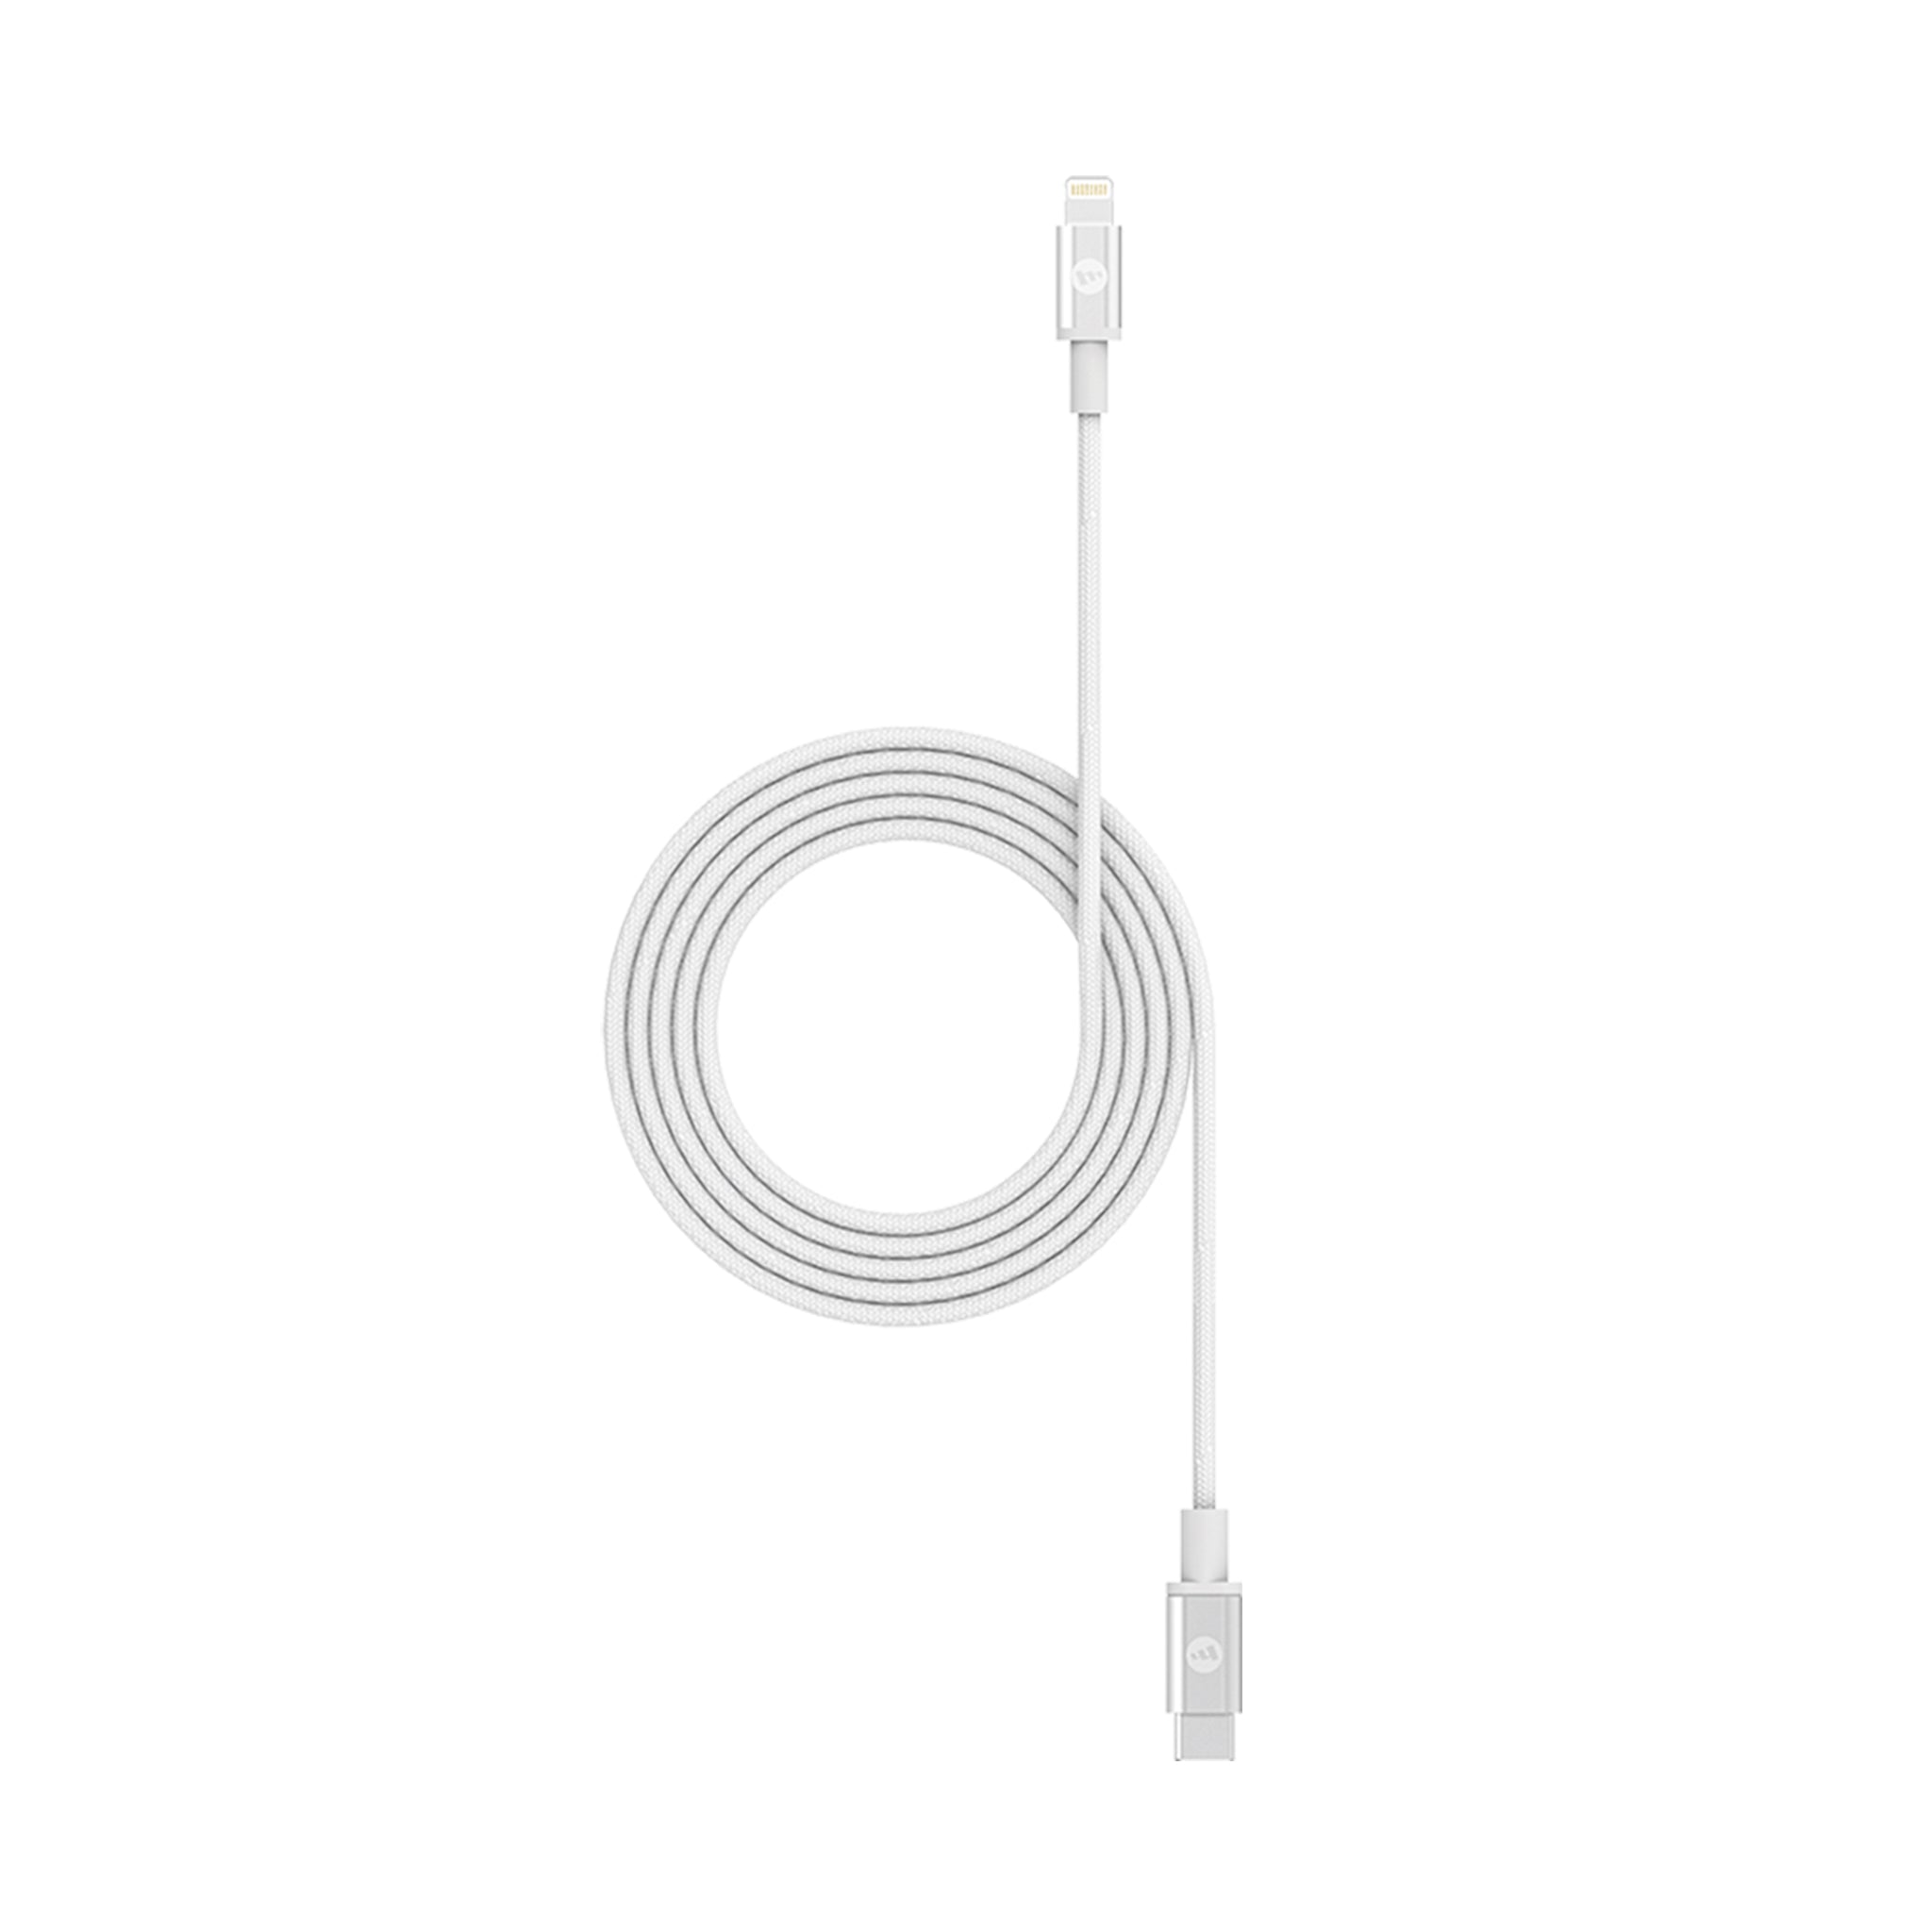 Mophie - Usb C To Apple Lightning Cable 3ft - White